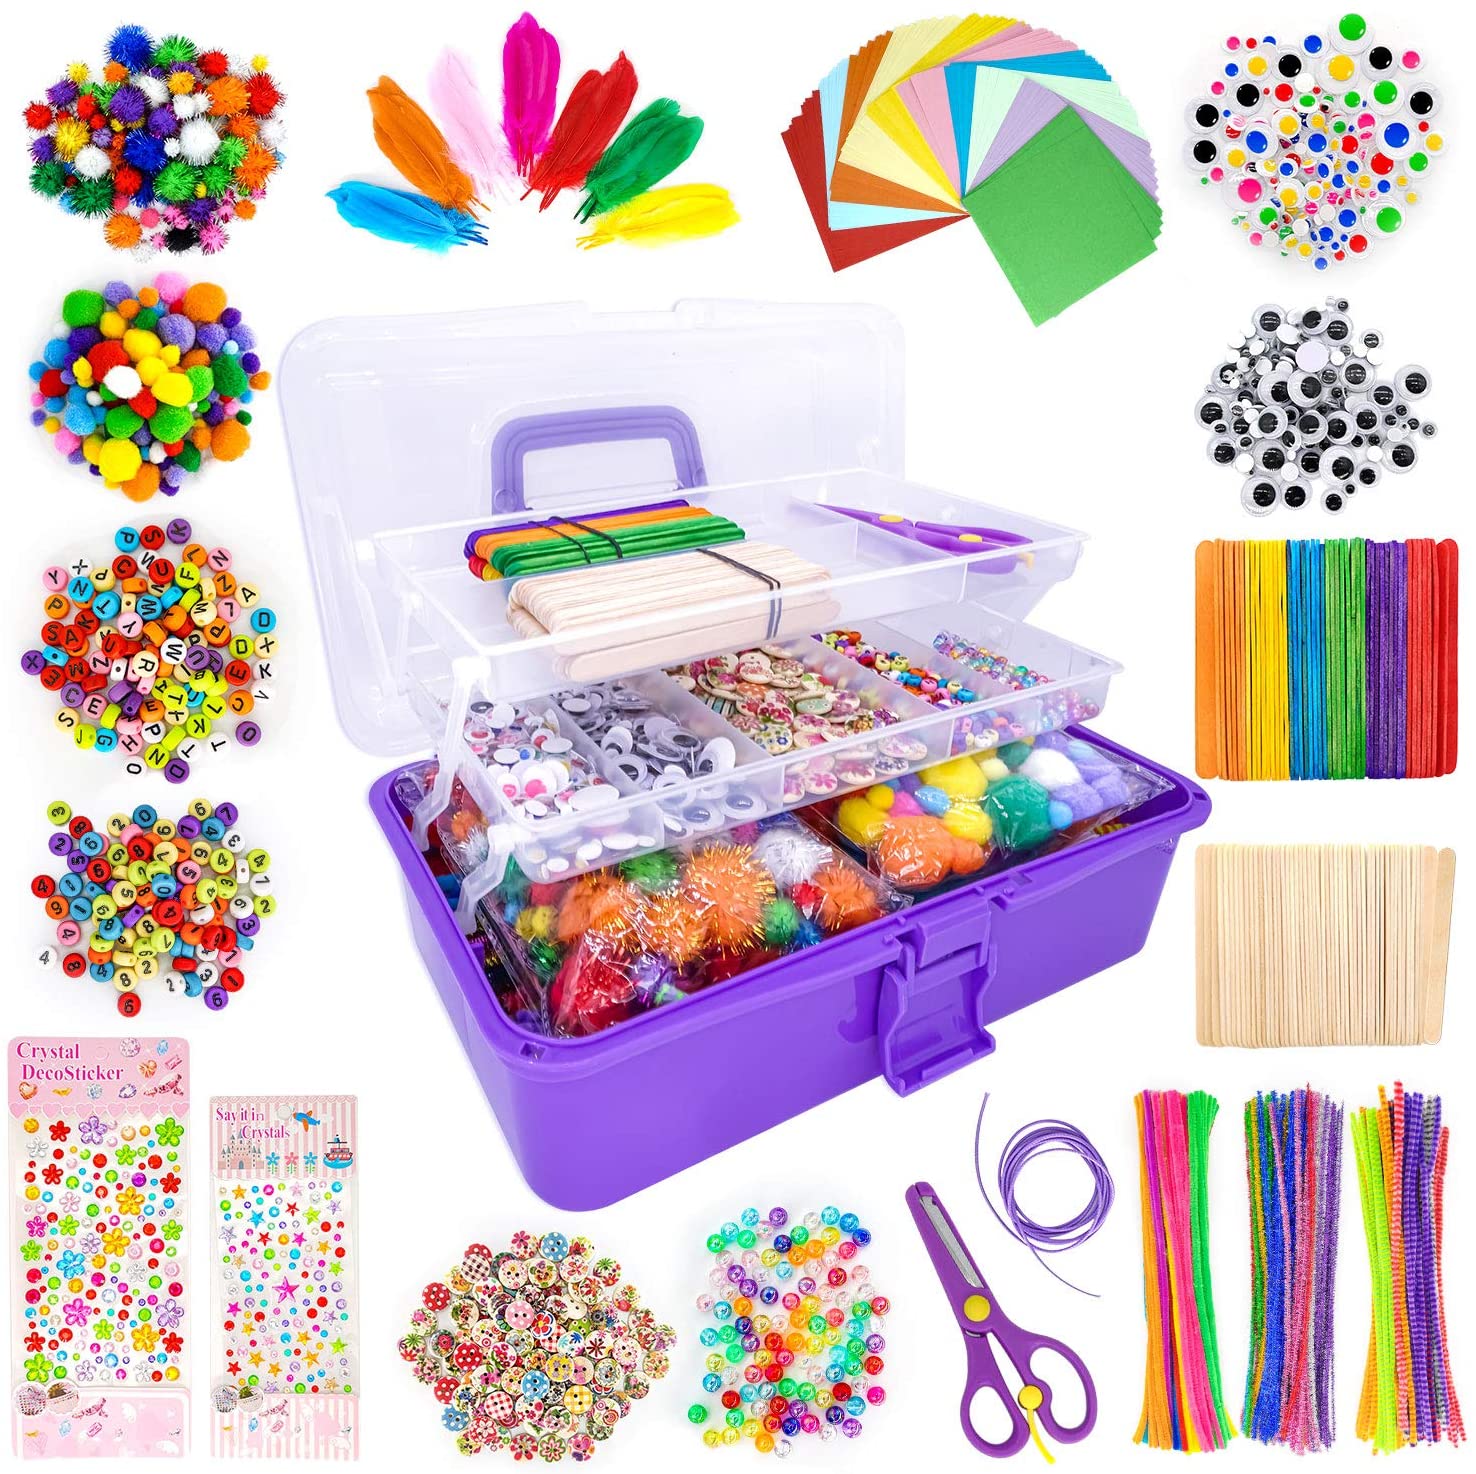 TUPARKA 1220 Pcs Arts and Crafts Supplies Set Includes Pipe Cleaners Pom Poms Buttons Wiggle Googly Eyes Buttons Sequins for Craft DIY Art Projects 